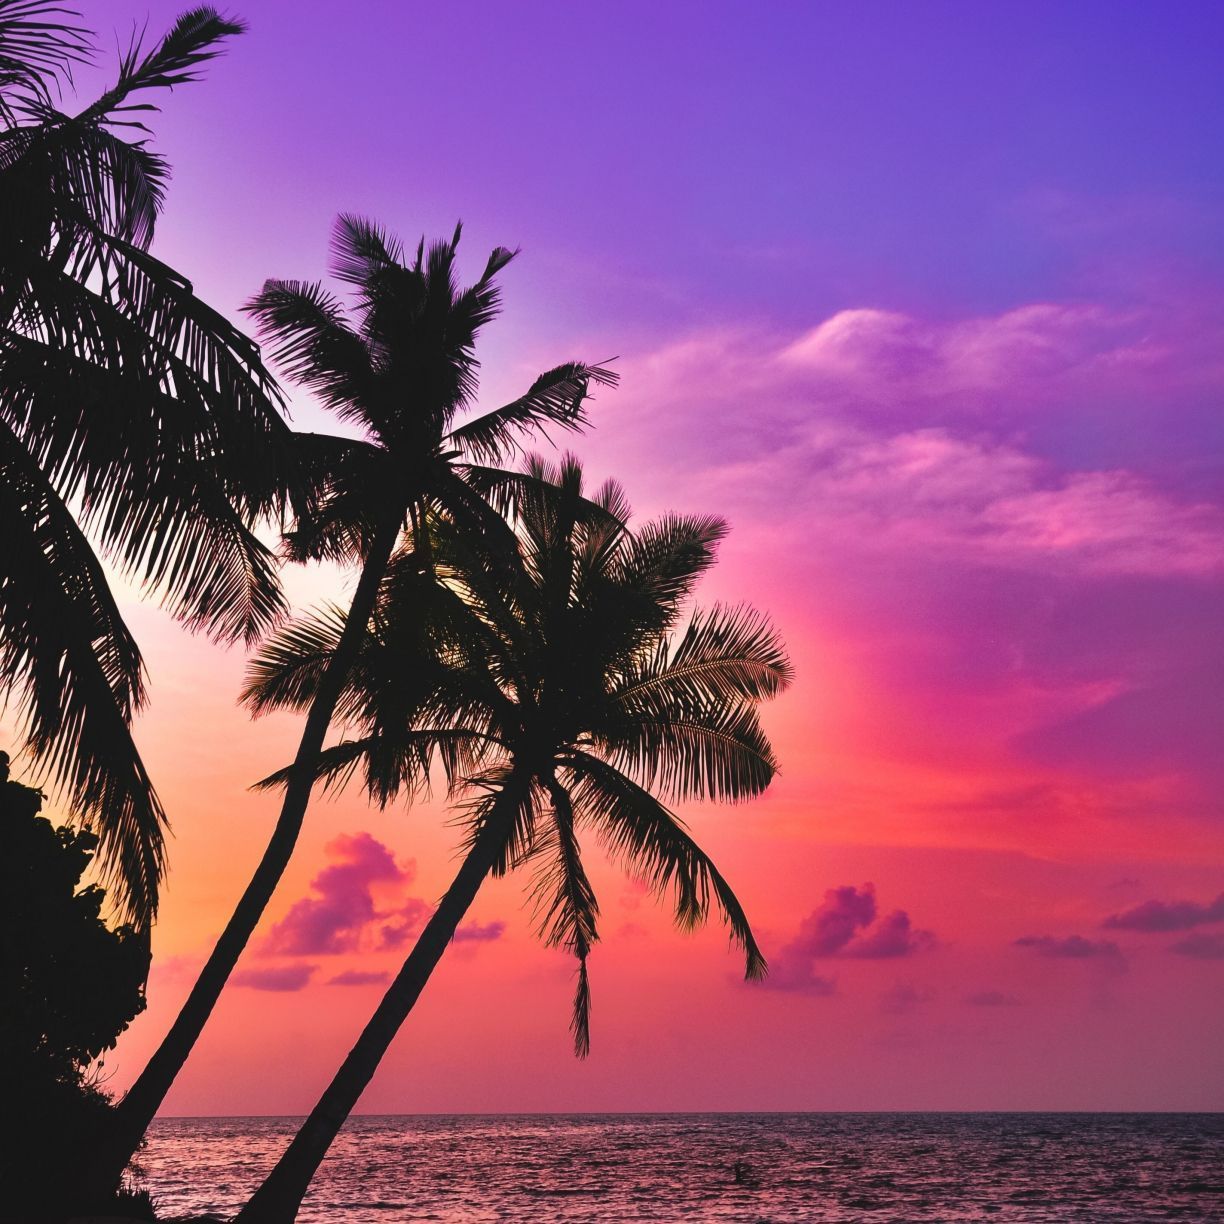 A sunset with palm trees on the beach - Tropical